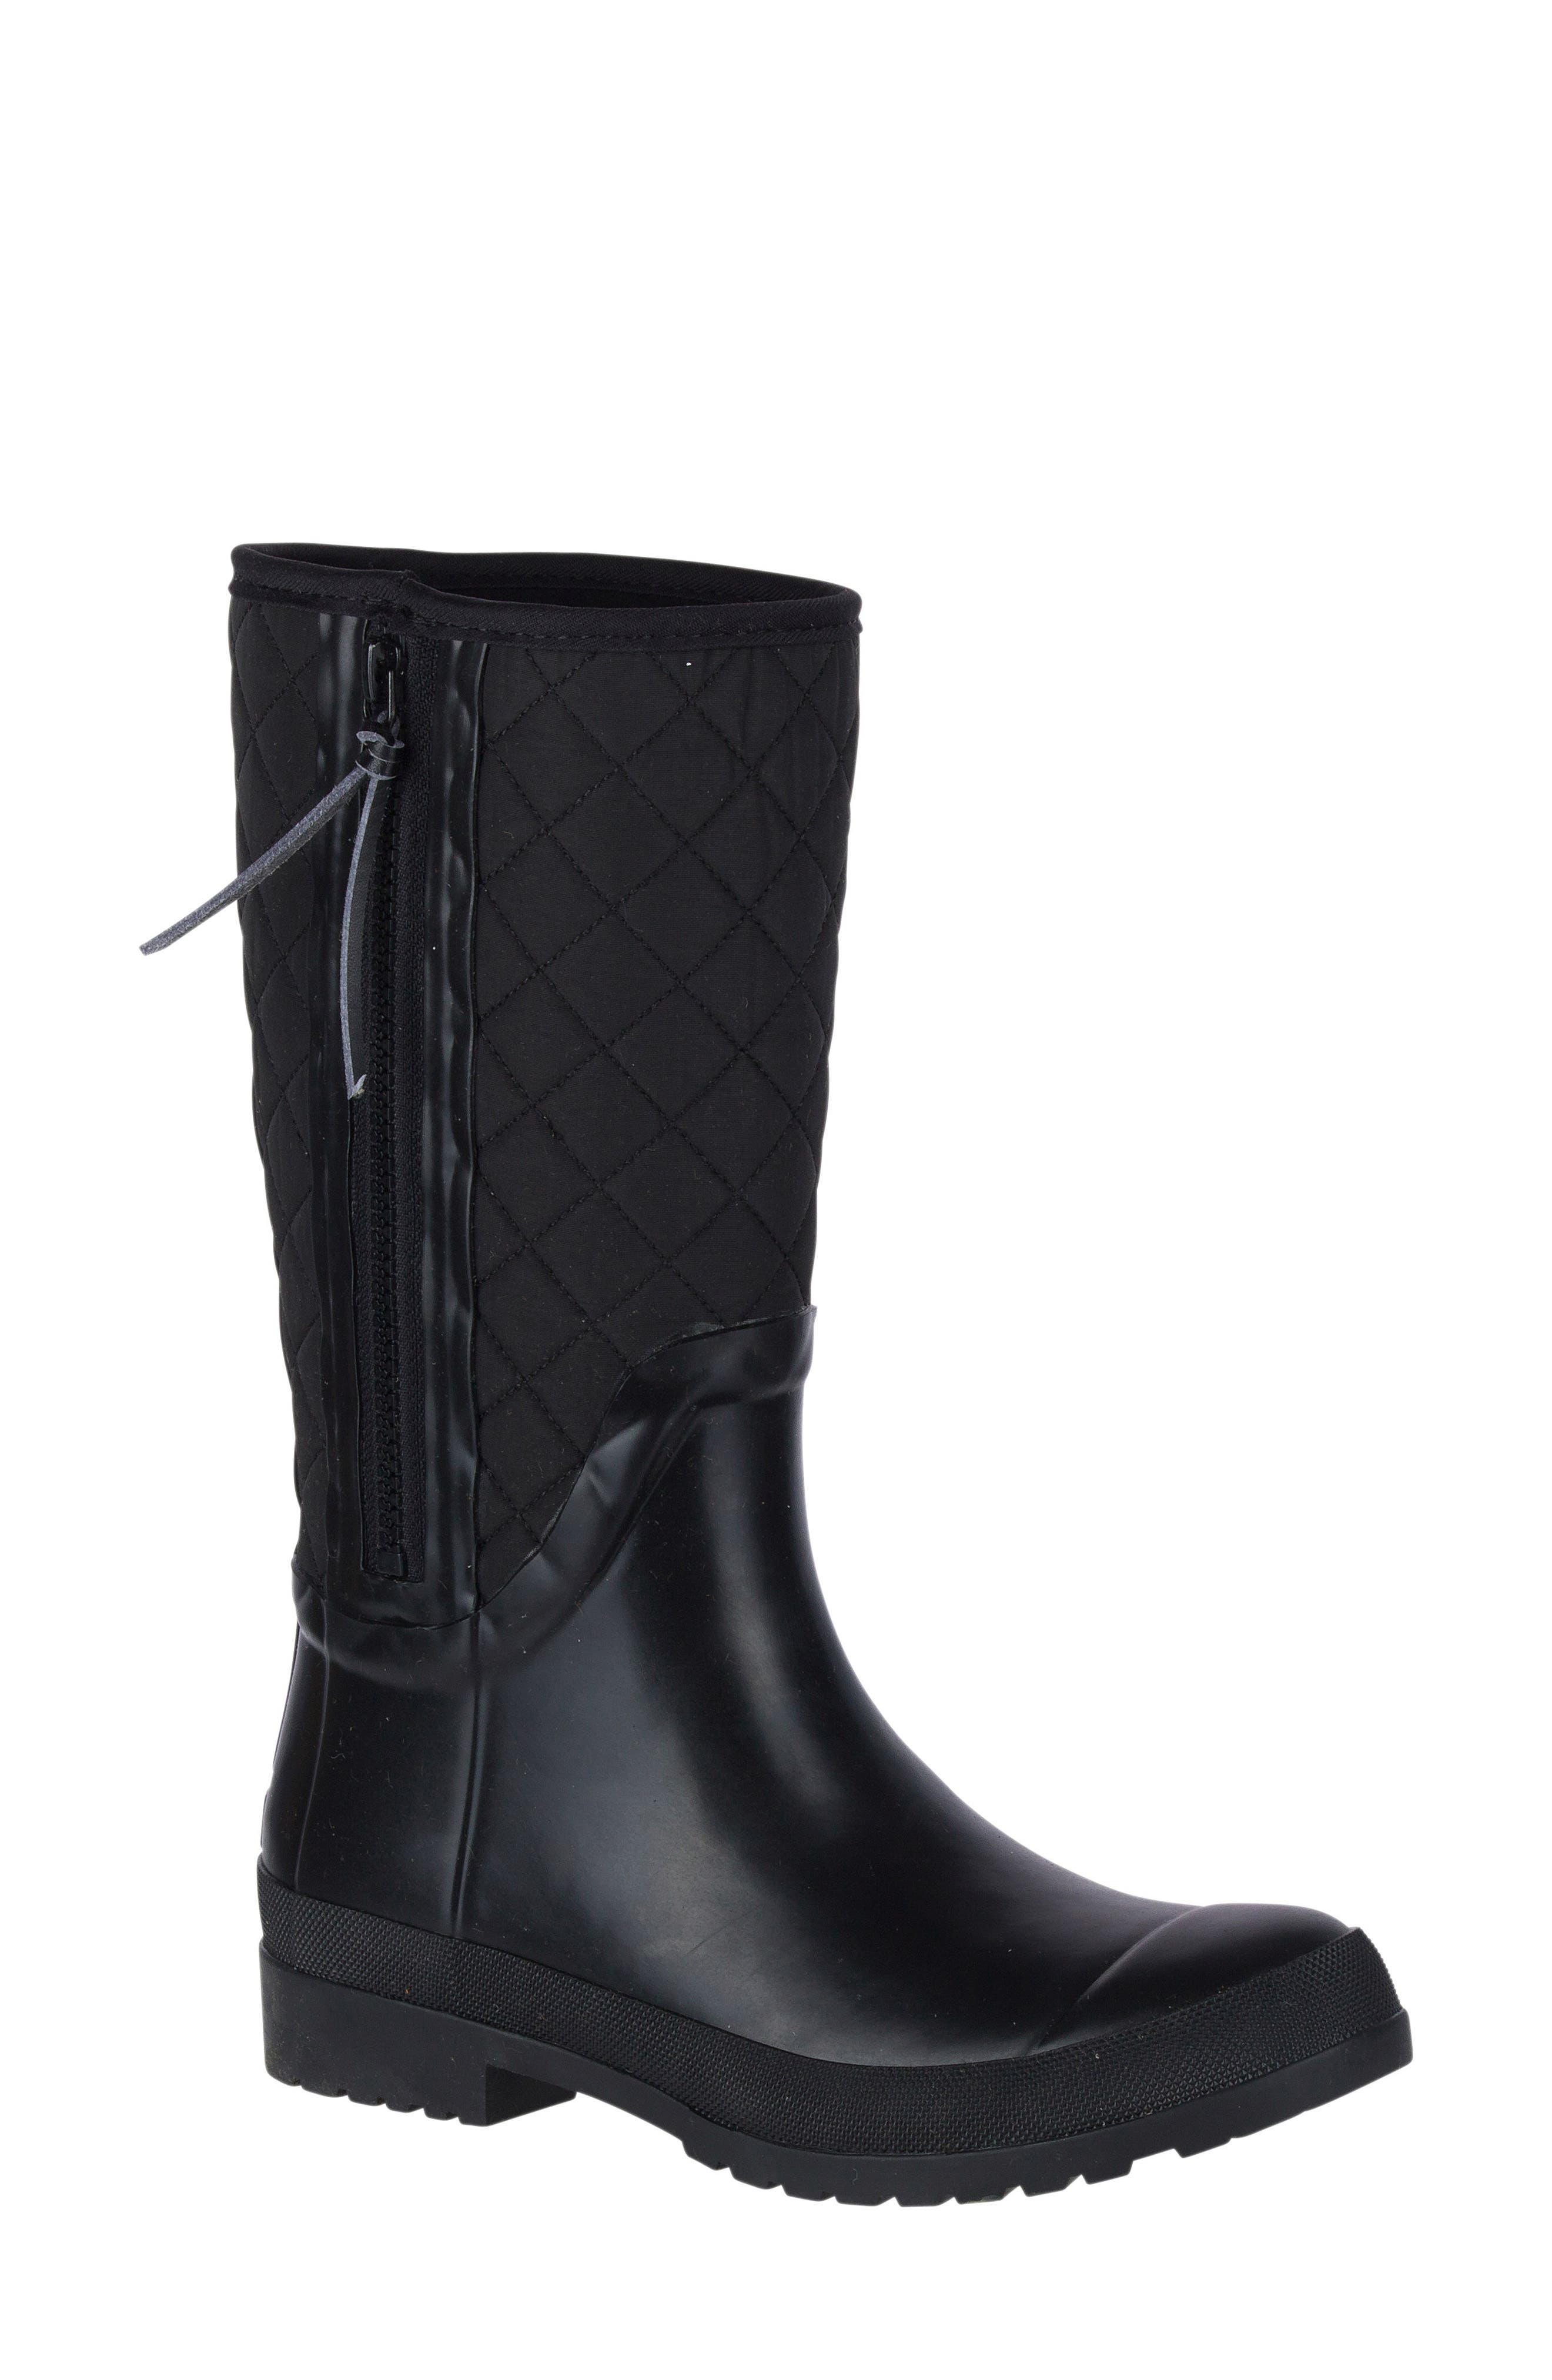 sperry quilted rain boots